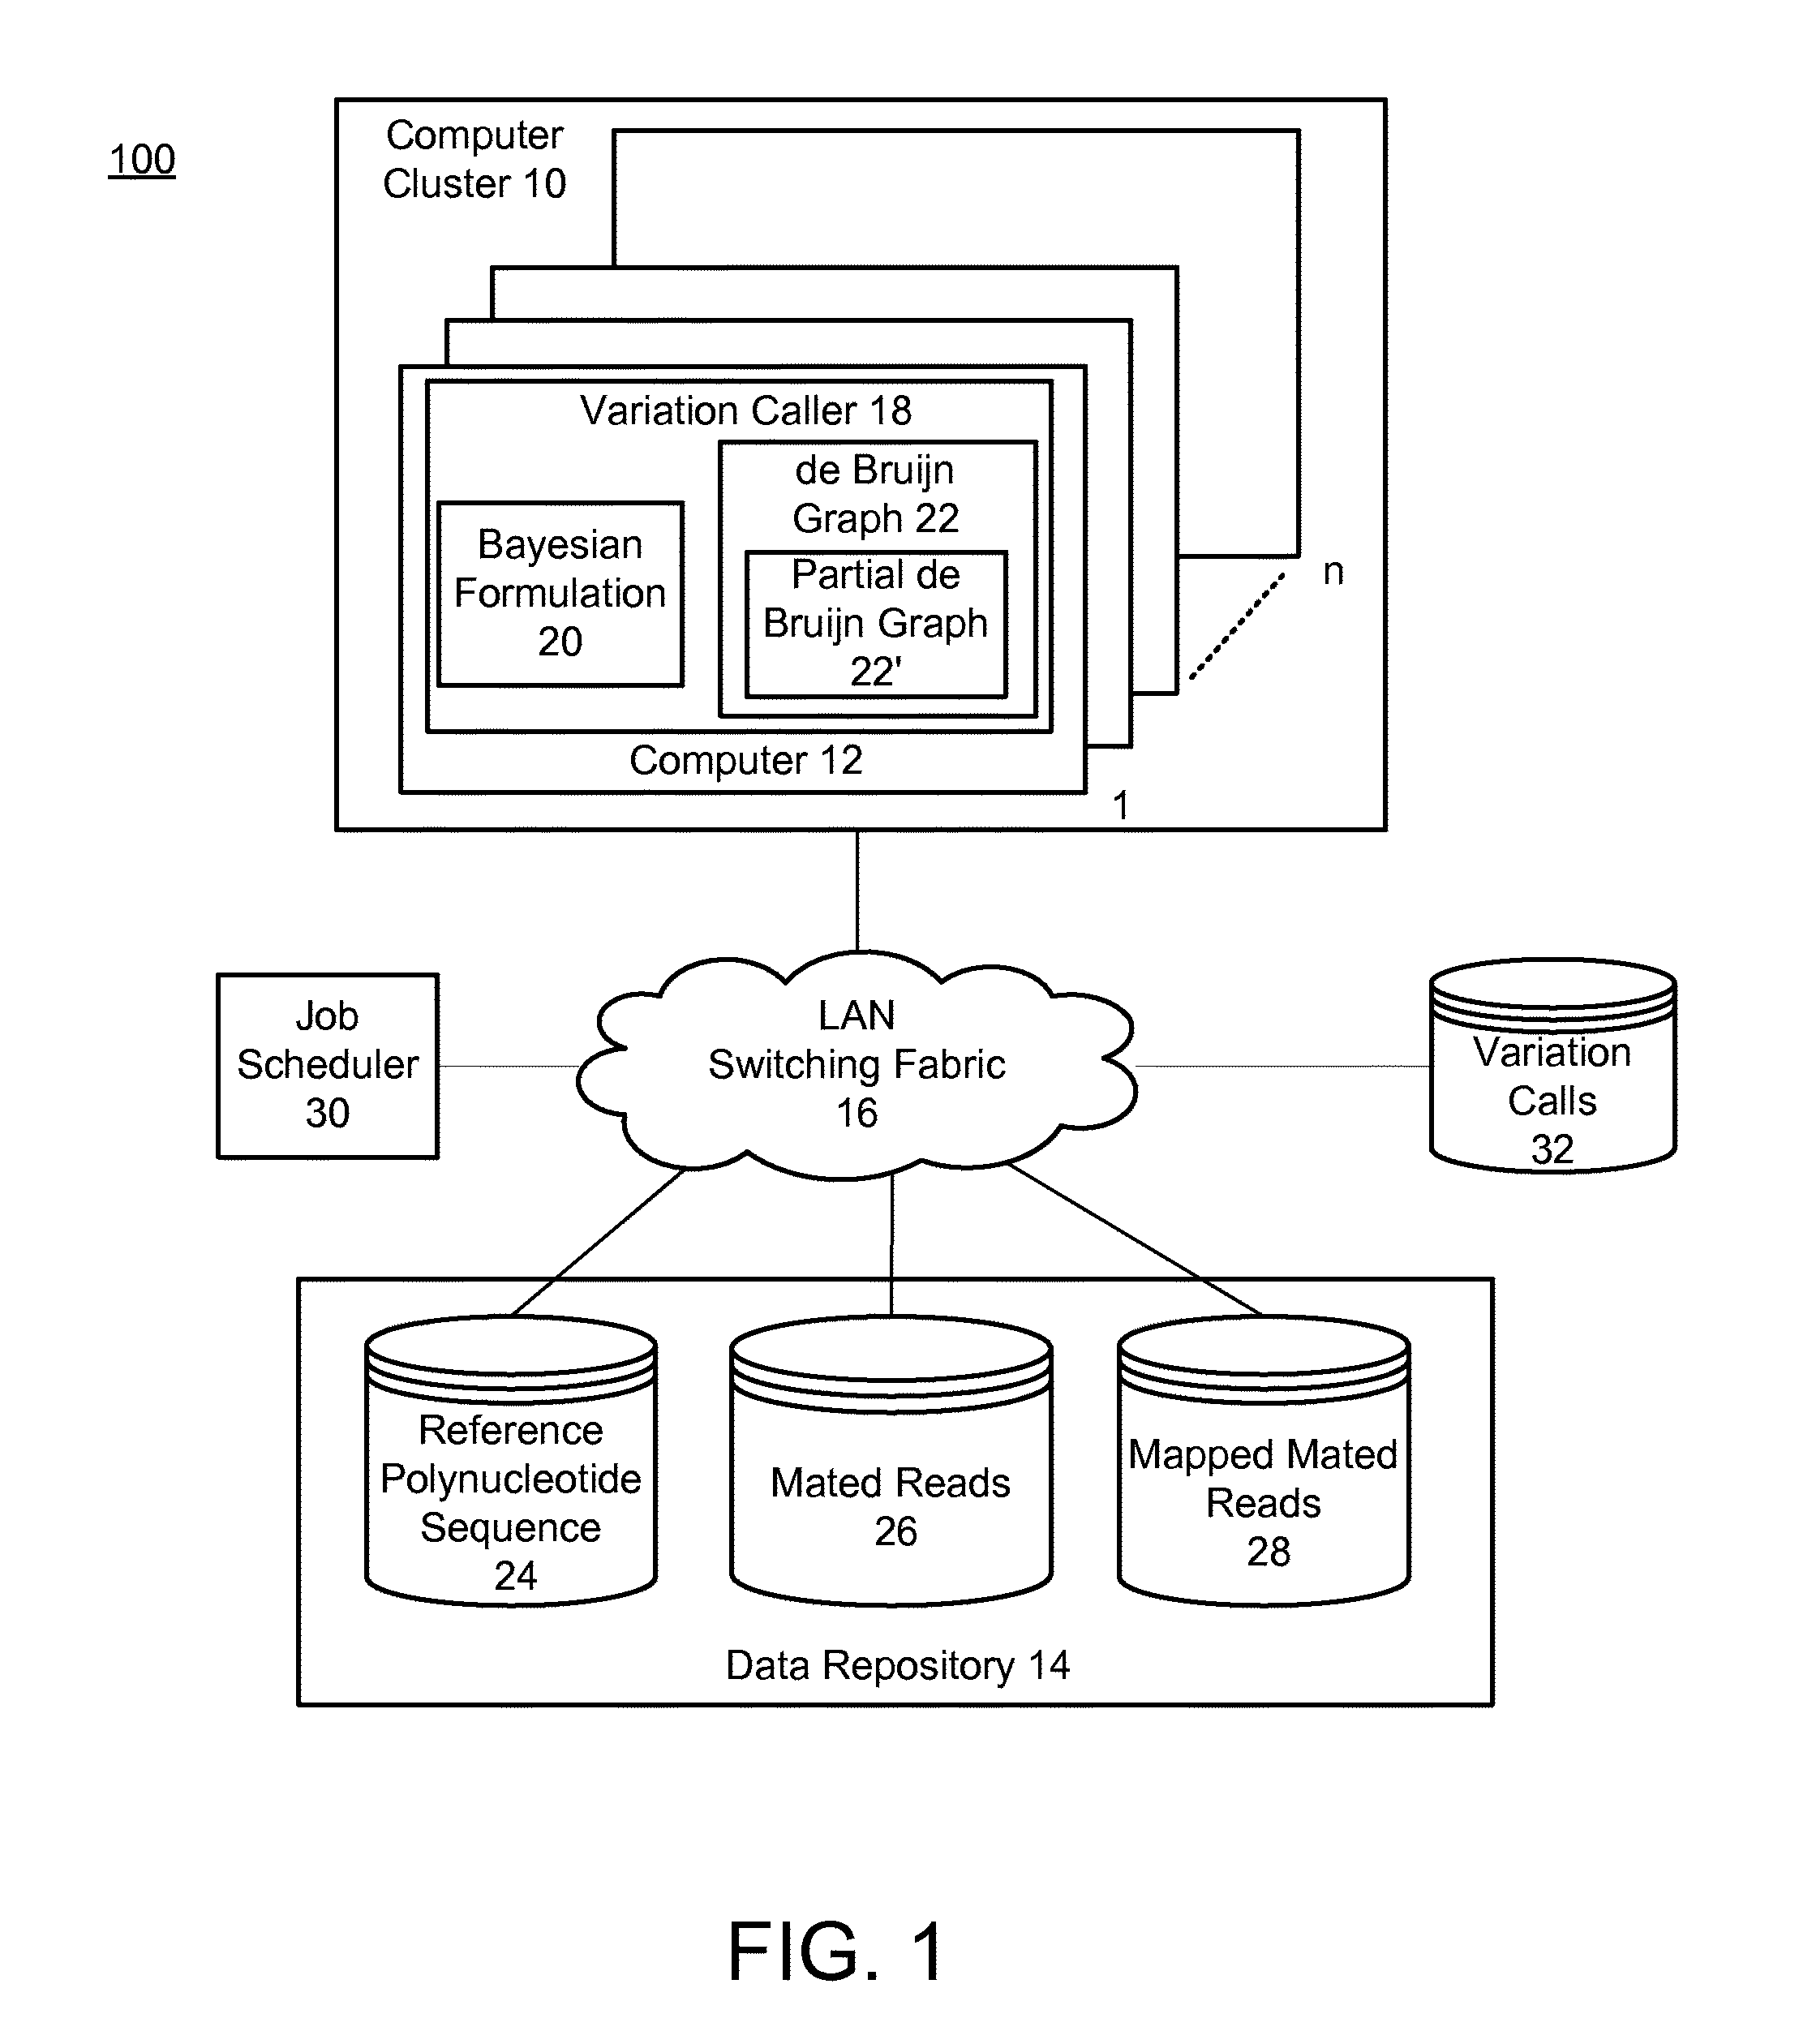 Method and system for calling variations in a sample polynucleotide sequence with respect to a reference polynucleotide sequence